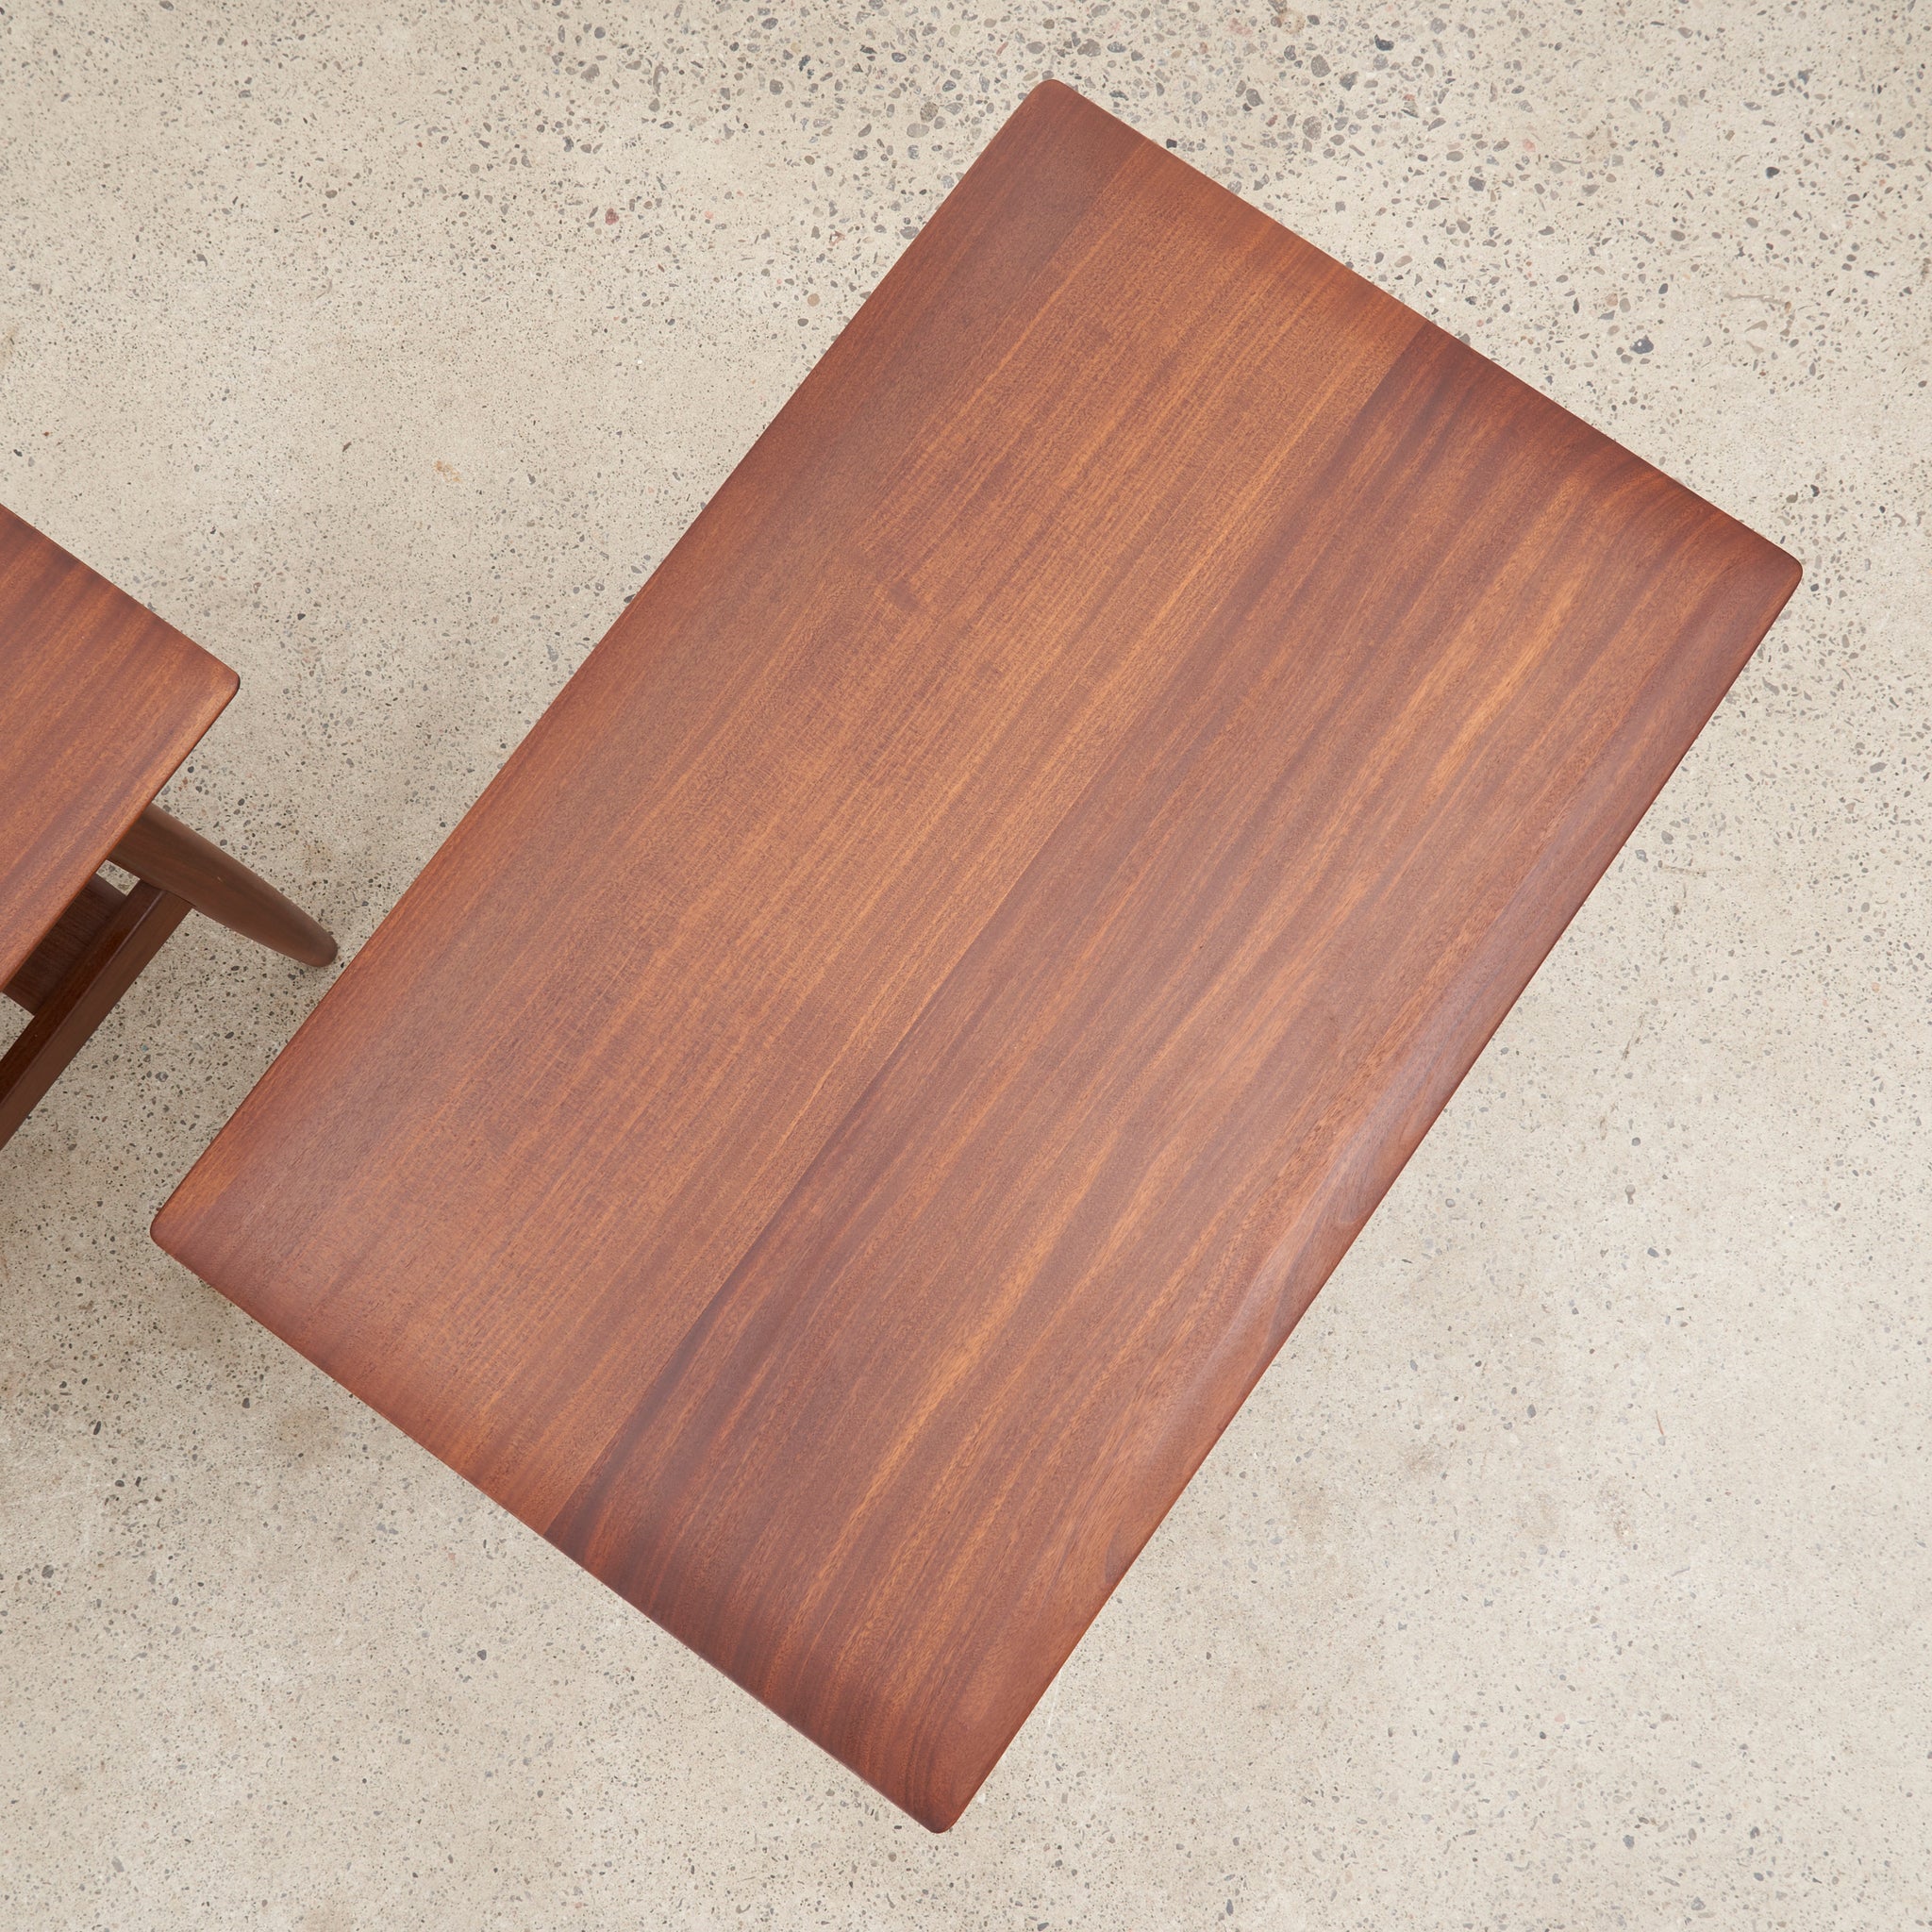 Pair of Solid Teak Side Tables by Imperial